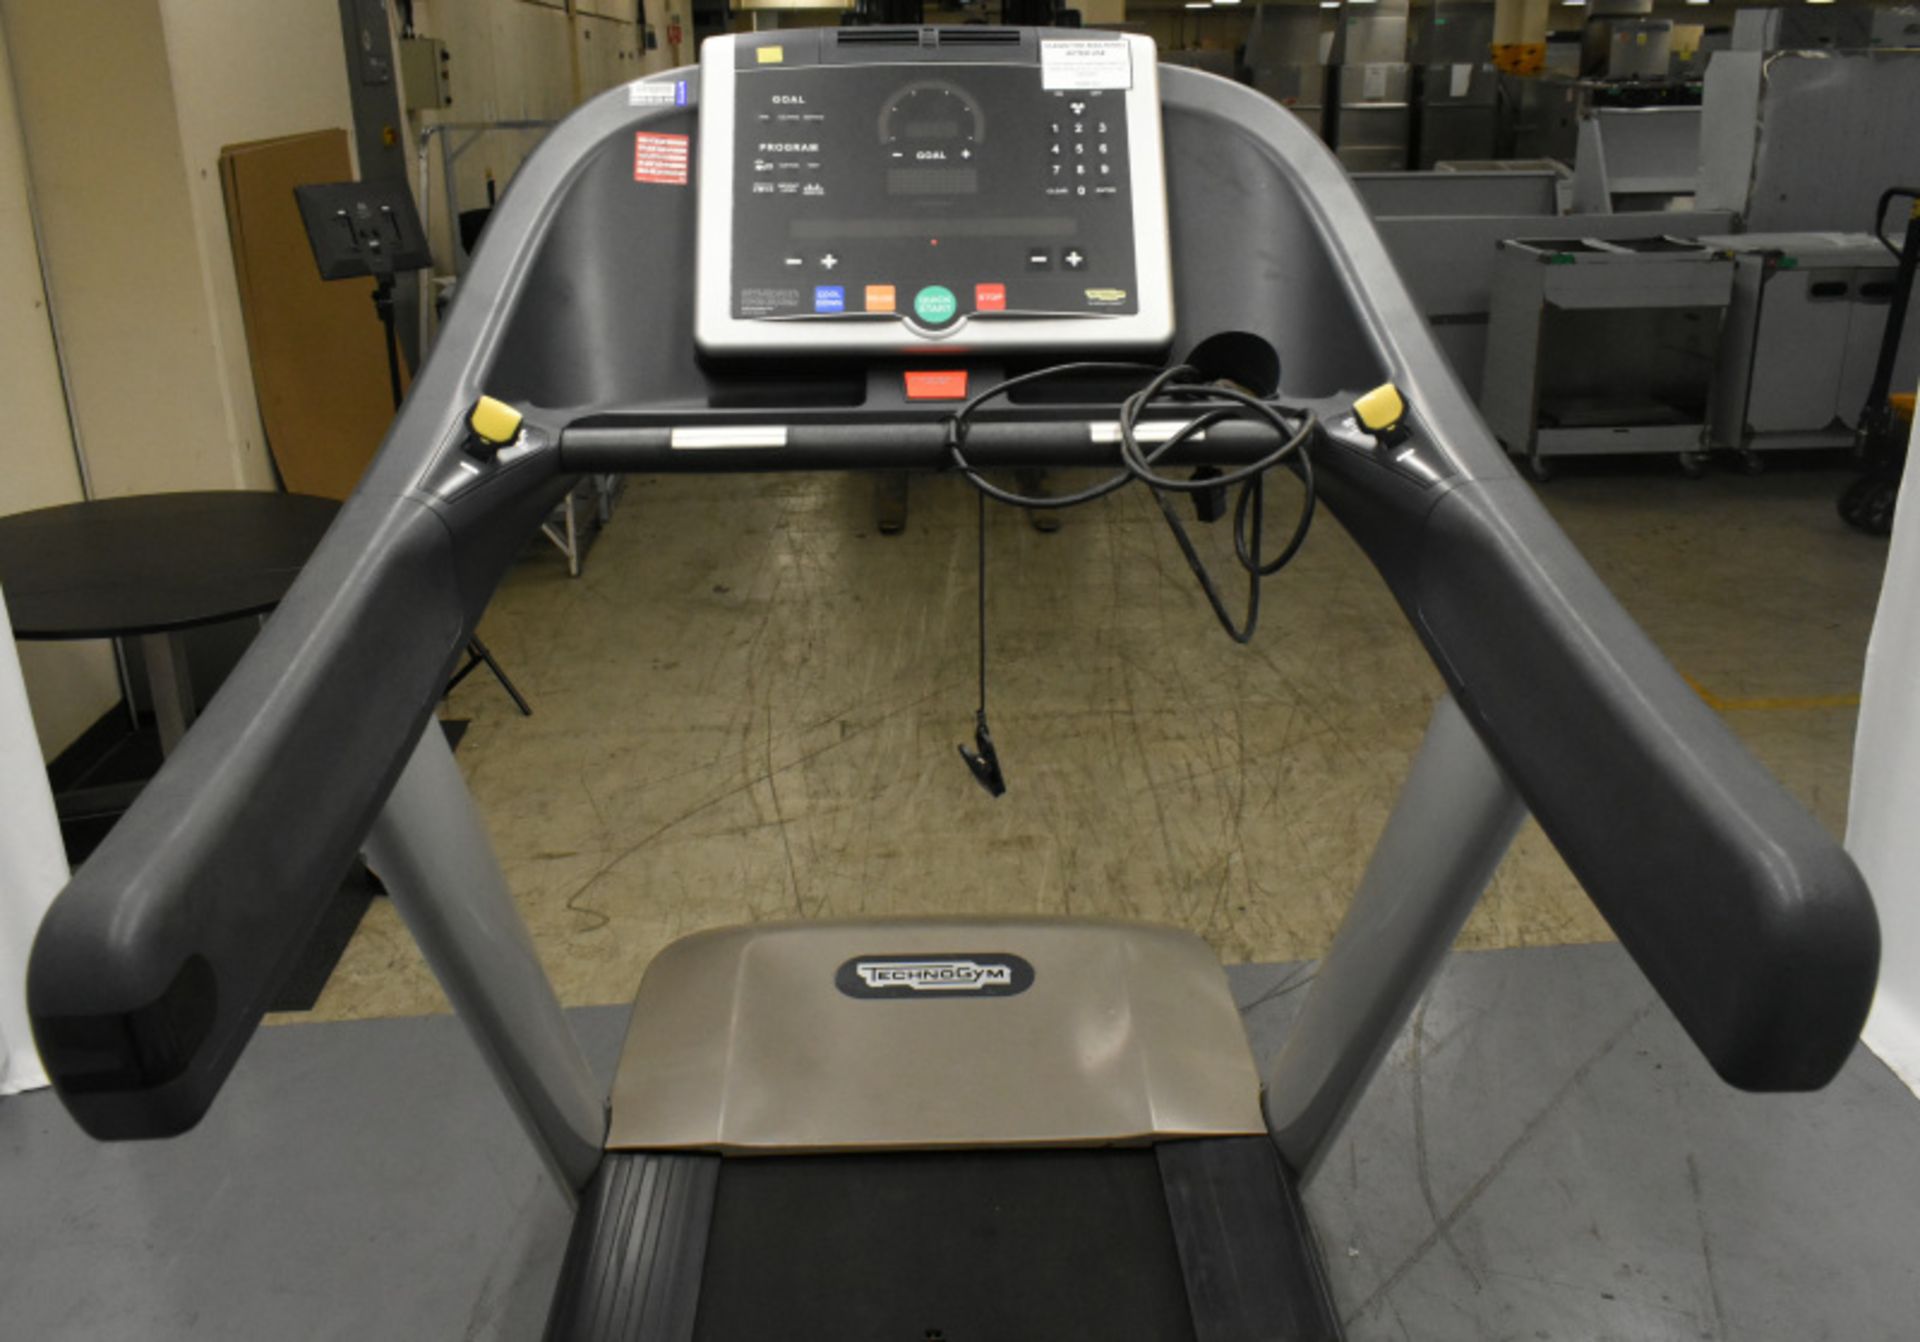 Technogym Treadmill - Please check pictures for overall condition - Image 3 of 9